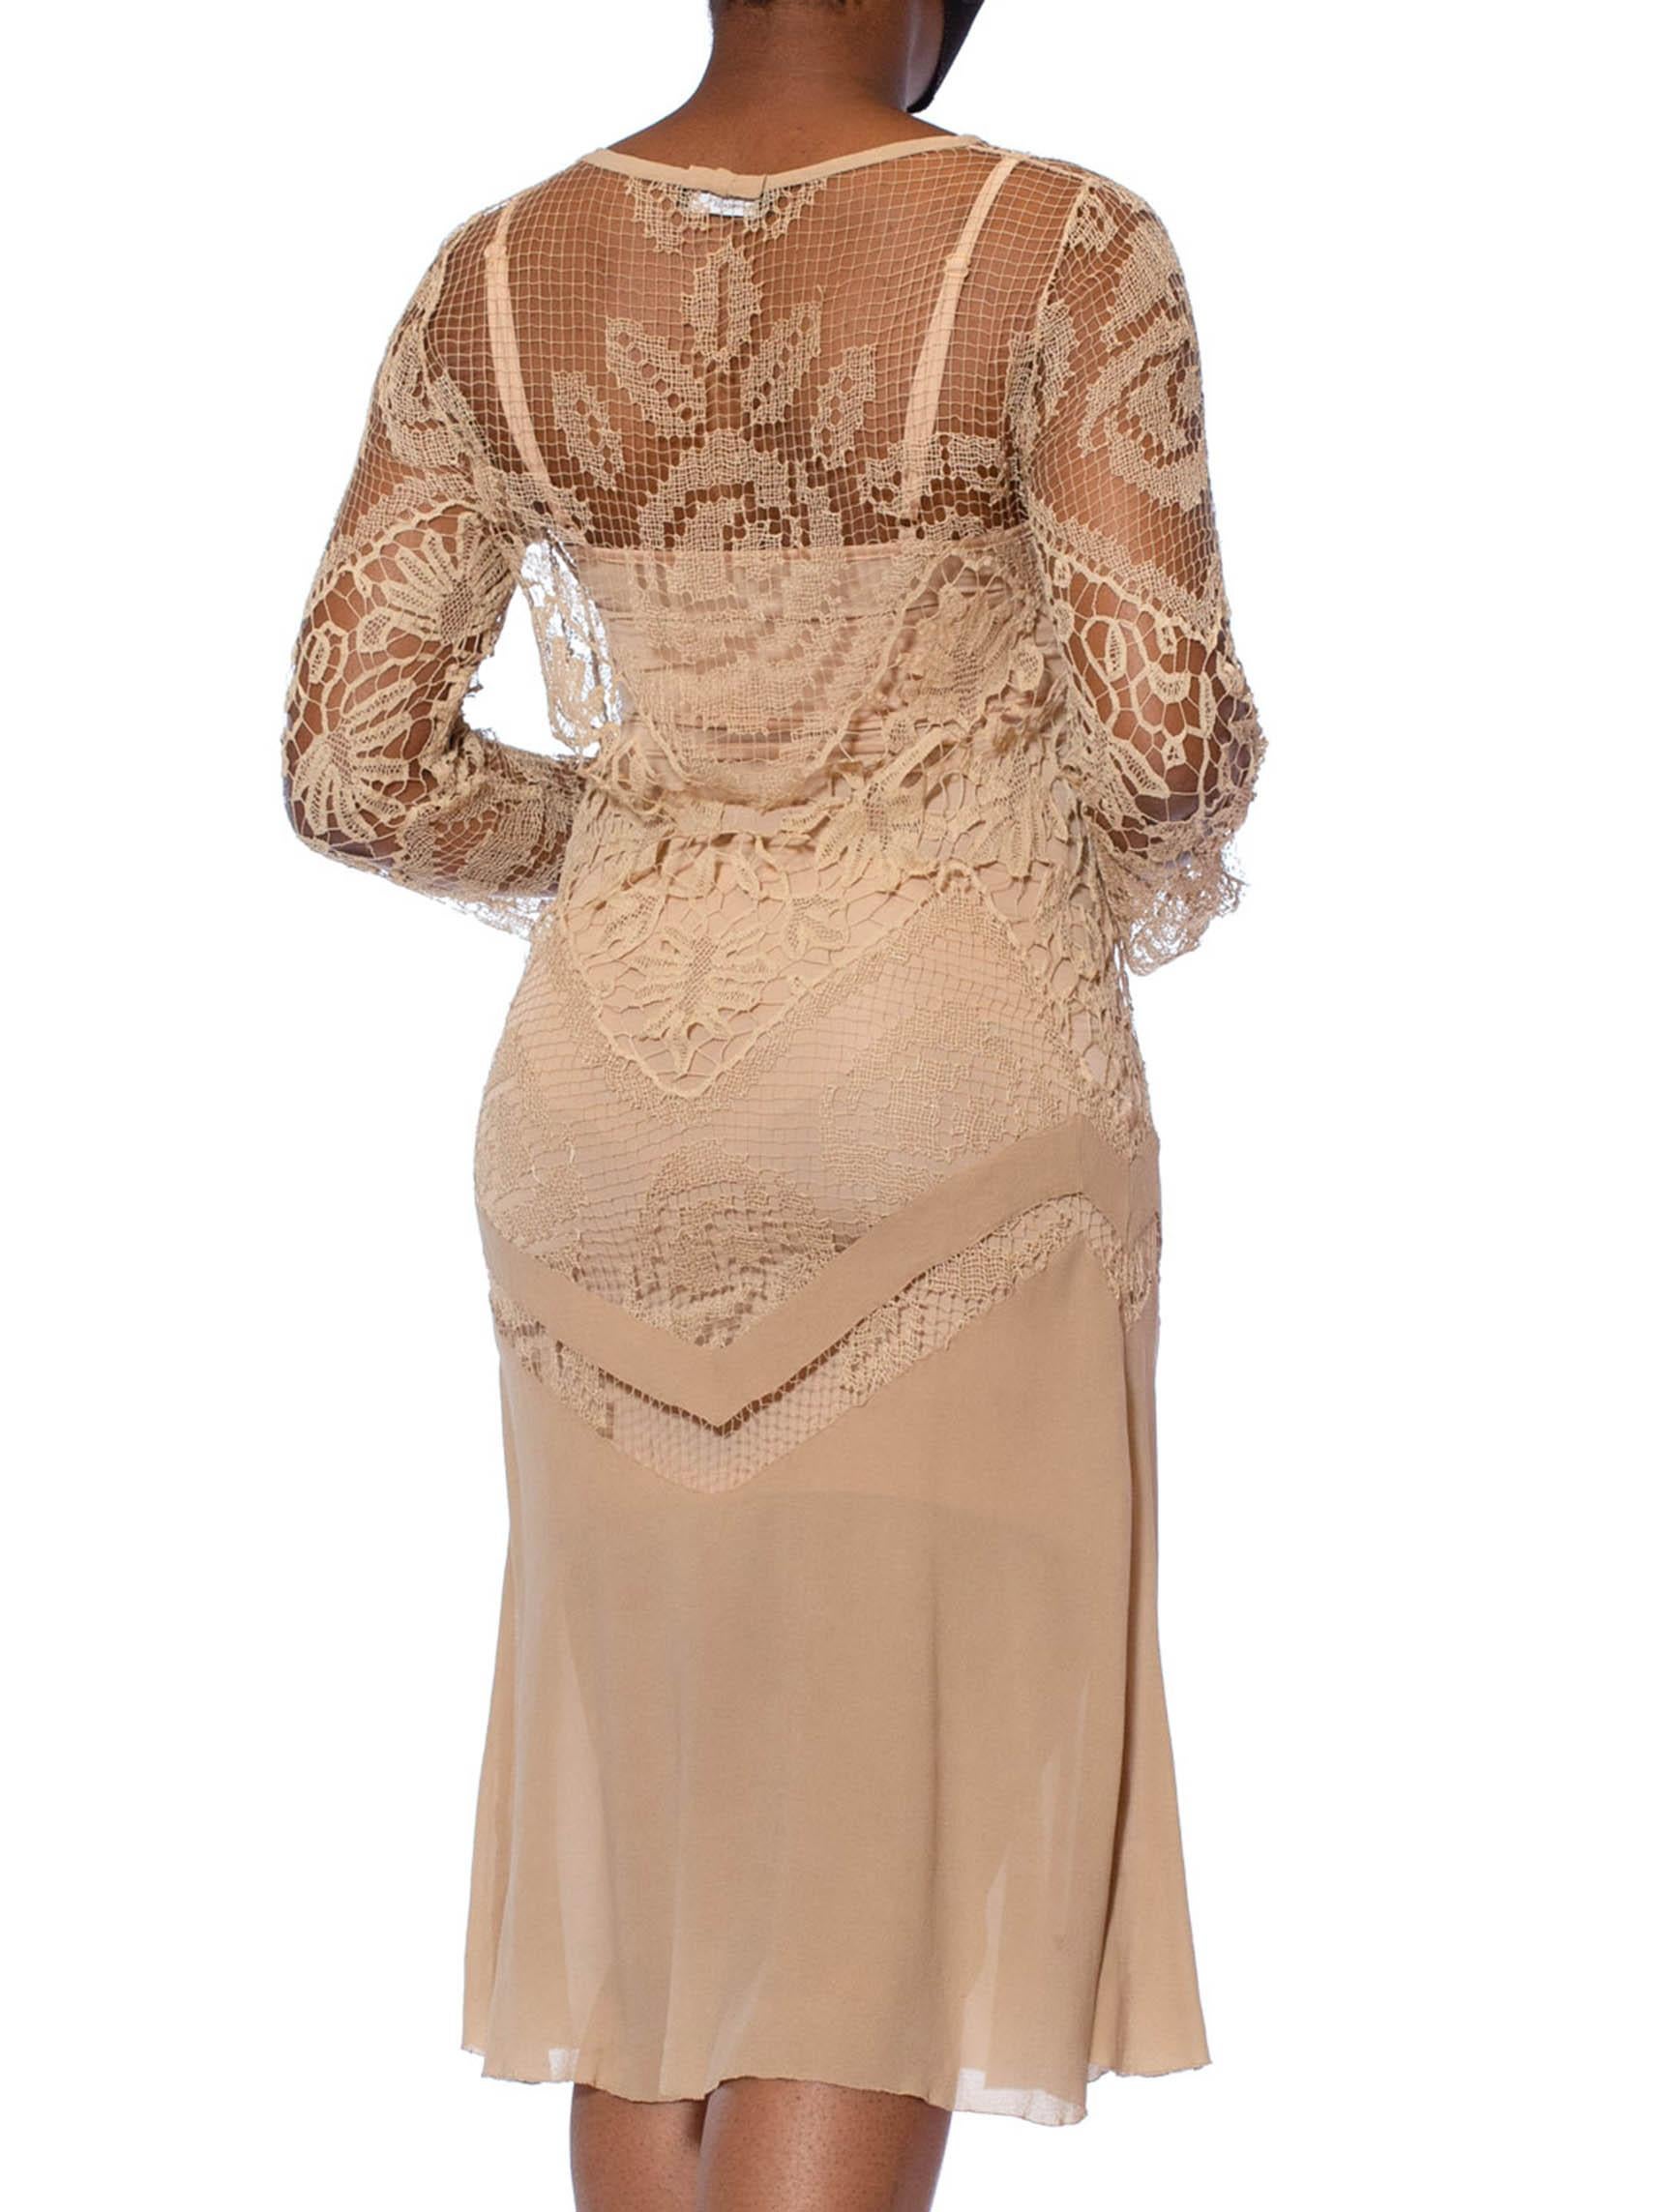 Women's 1920S Beige Handmade Lace & Silk Chiffon Dress With Long Sleeves For Sale